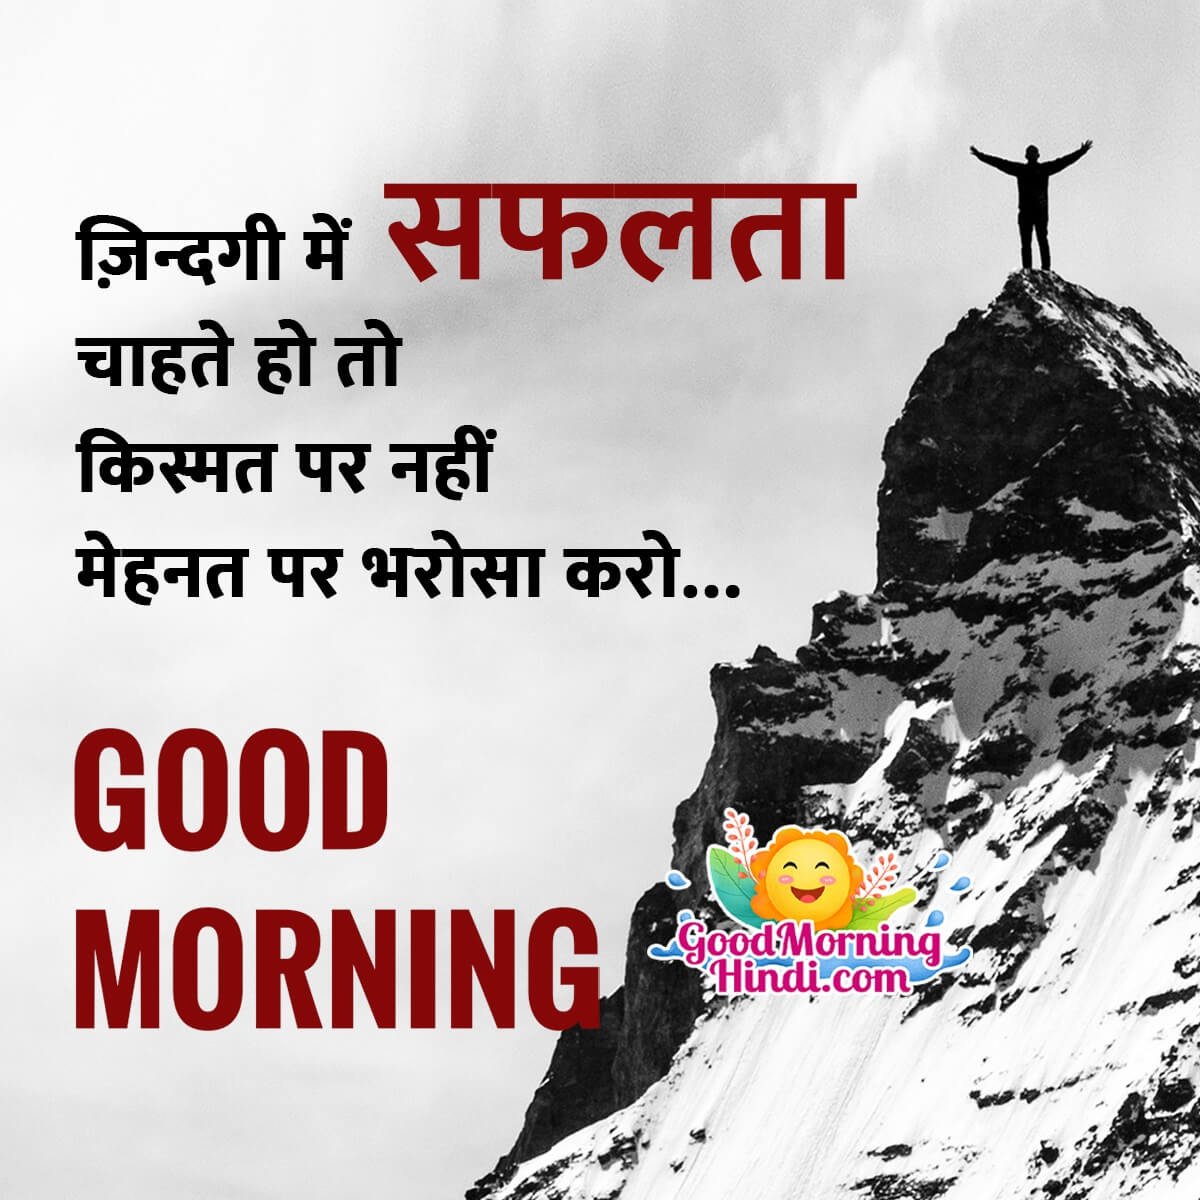 Good Morning Thought Of The Day In Hindi